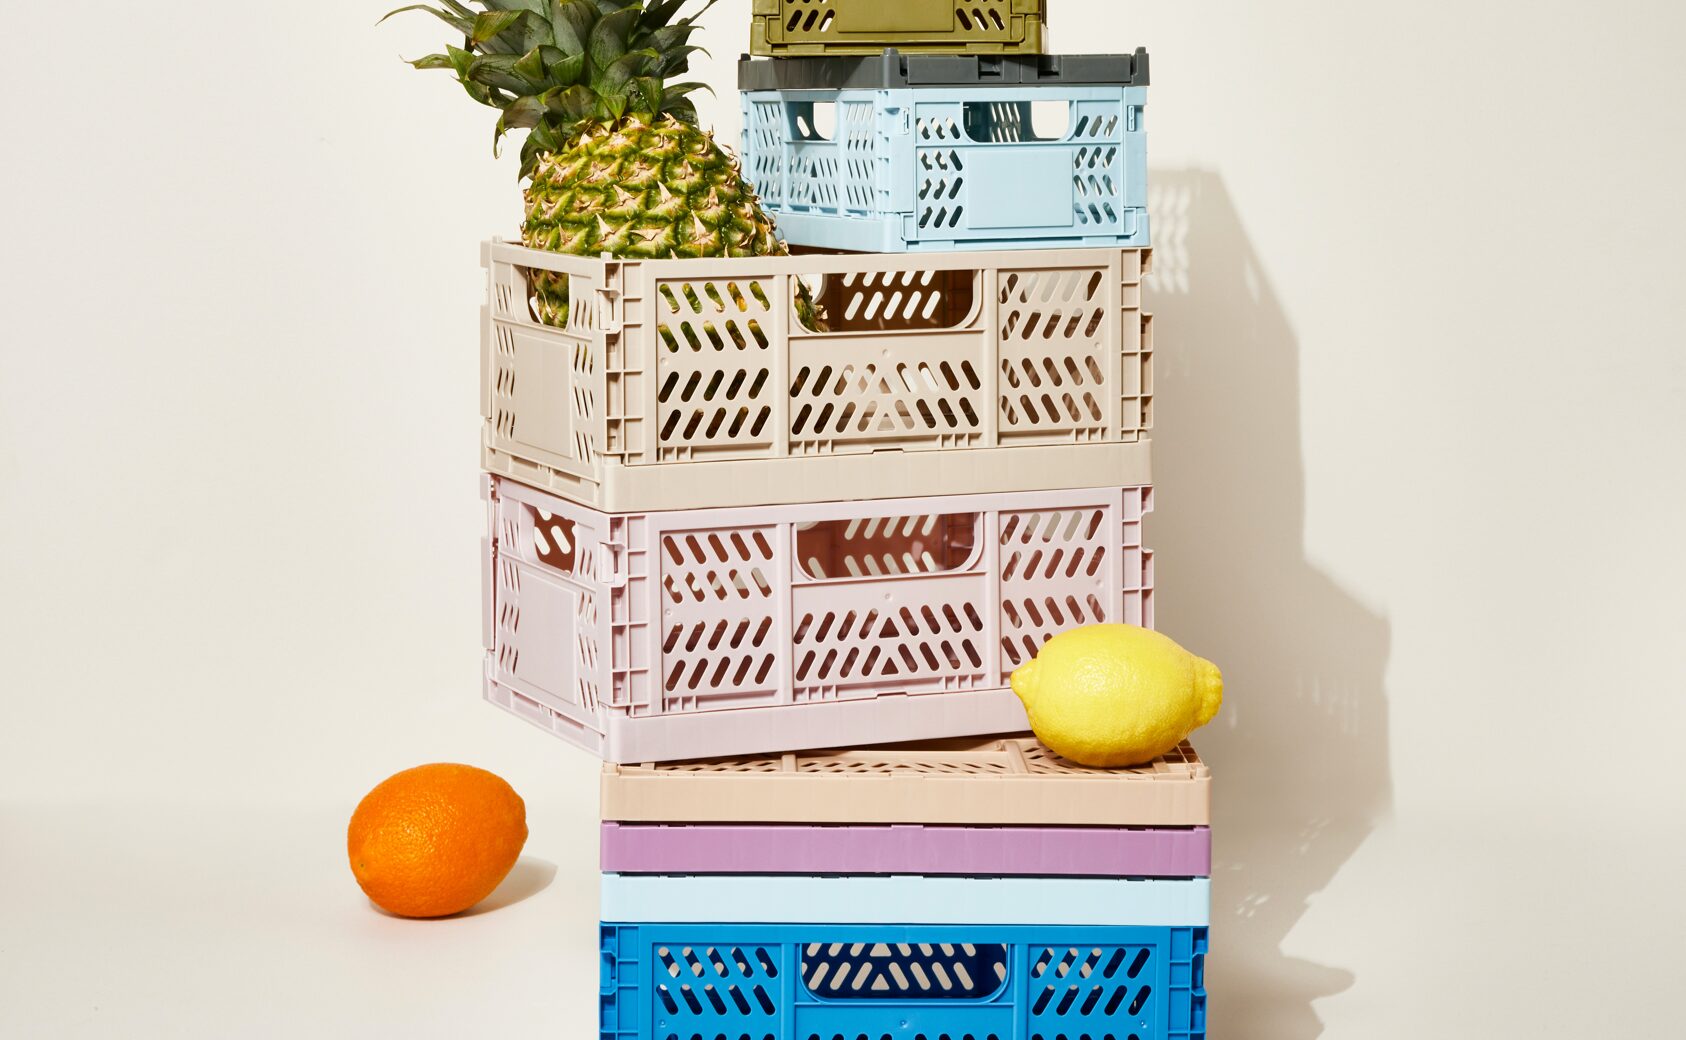 Colourful Oui collapsible stacking crates with some fruit placed inside.